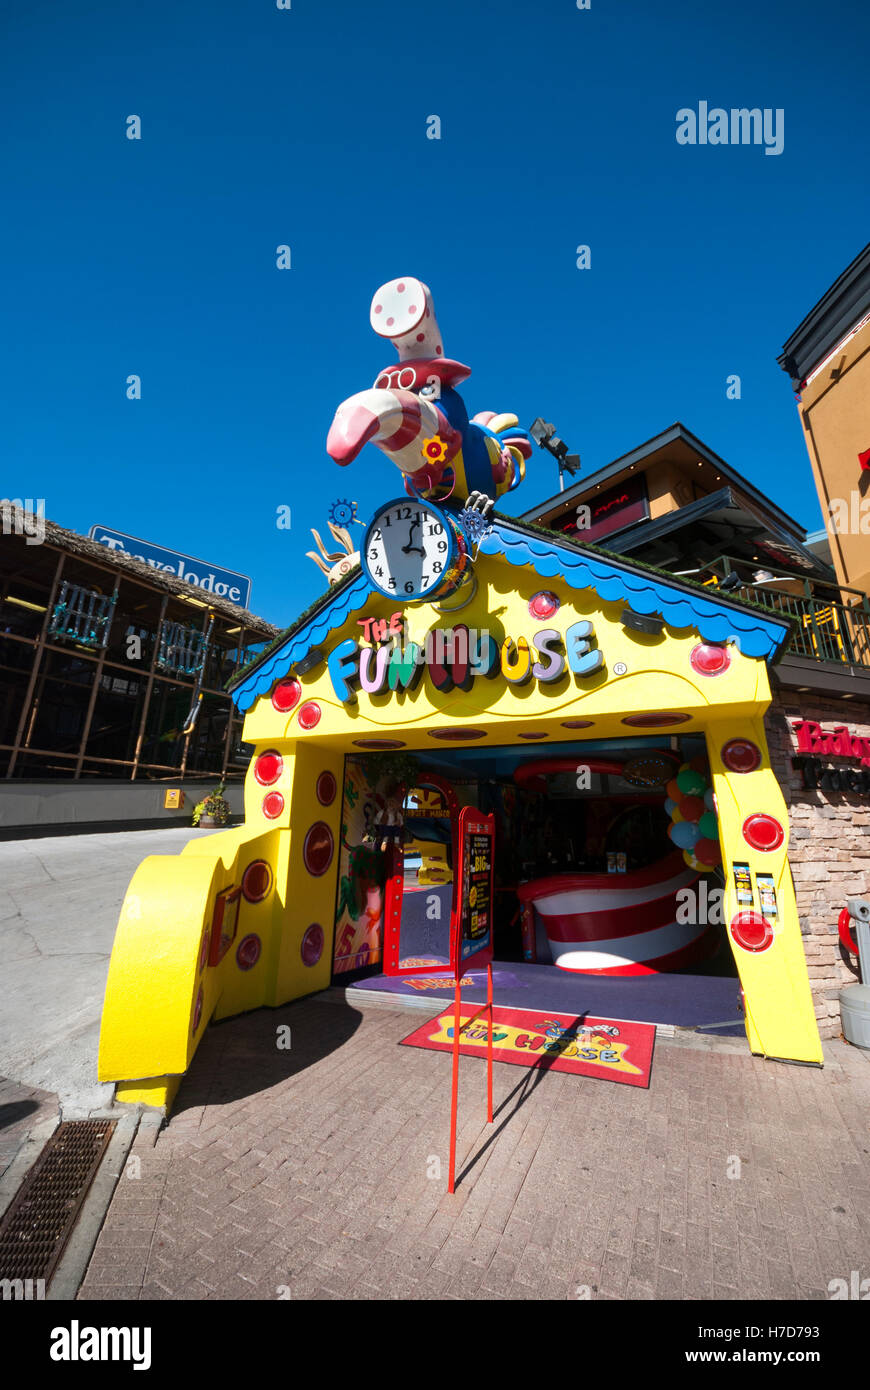 The Funhouse, a childrens entertainment attraction in the Clifton hill tourist area of Niagara Falls Canada Stock Photo